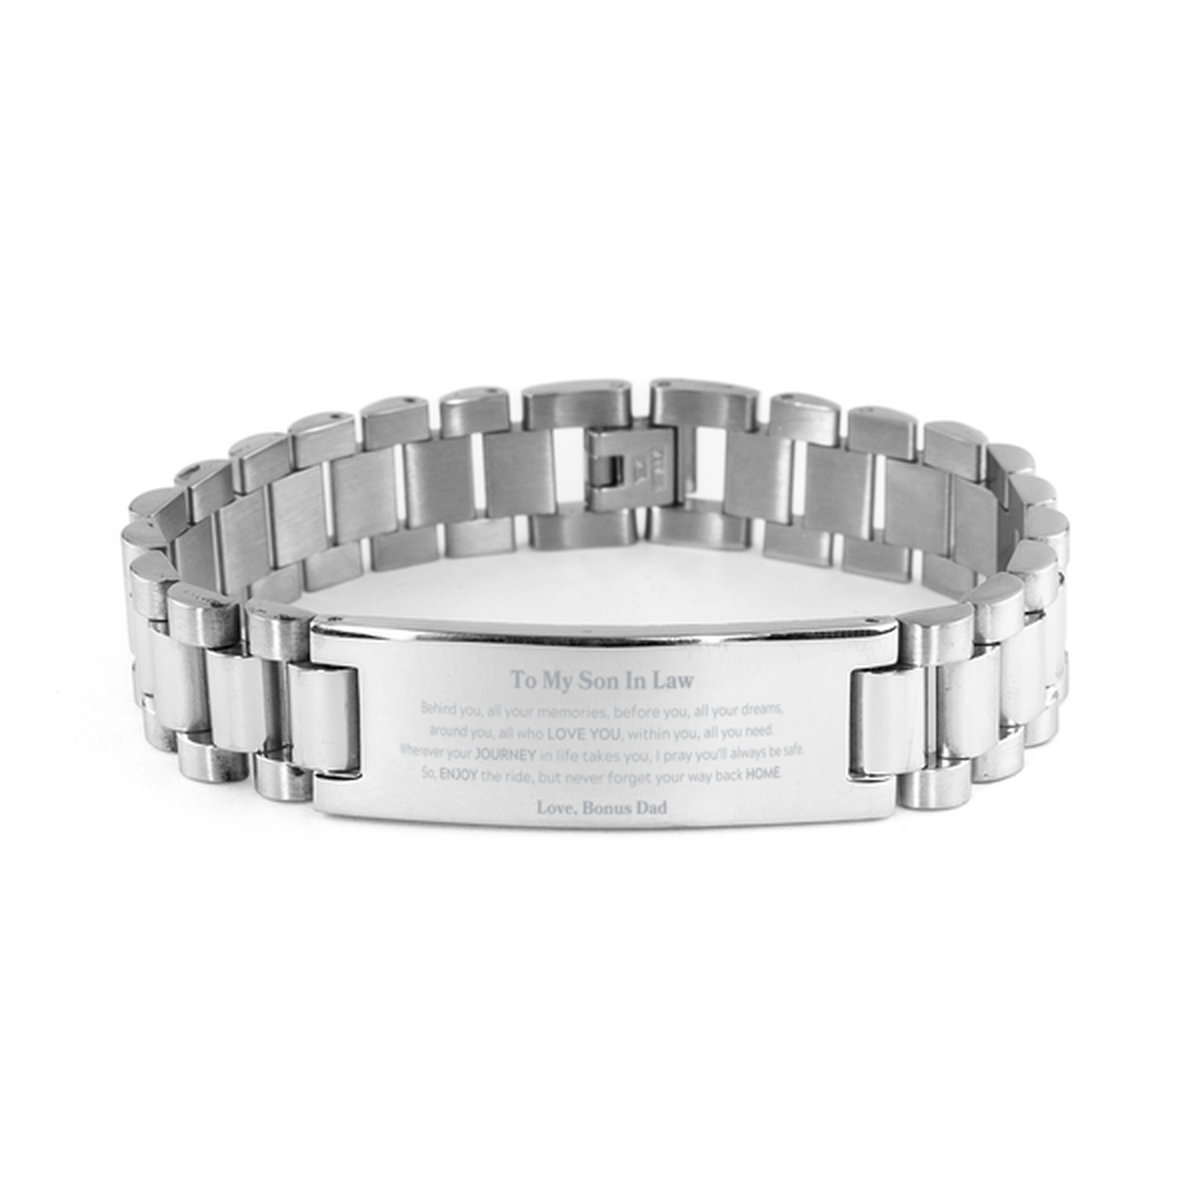 To My Son In Law Graduation Gifts from Bonus Dad, Son In Law Ladder Stainless Steel Bracelet Christmas Birthday Gifts for Son In Law Behind you, all your memories, before you, all your dreams. Love, Bonus Dad